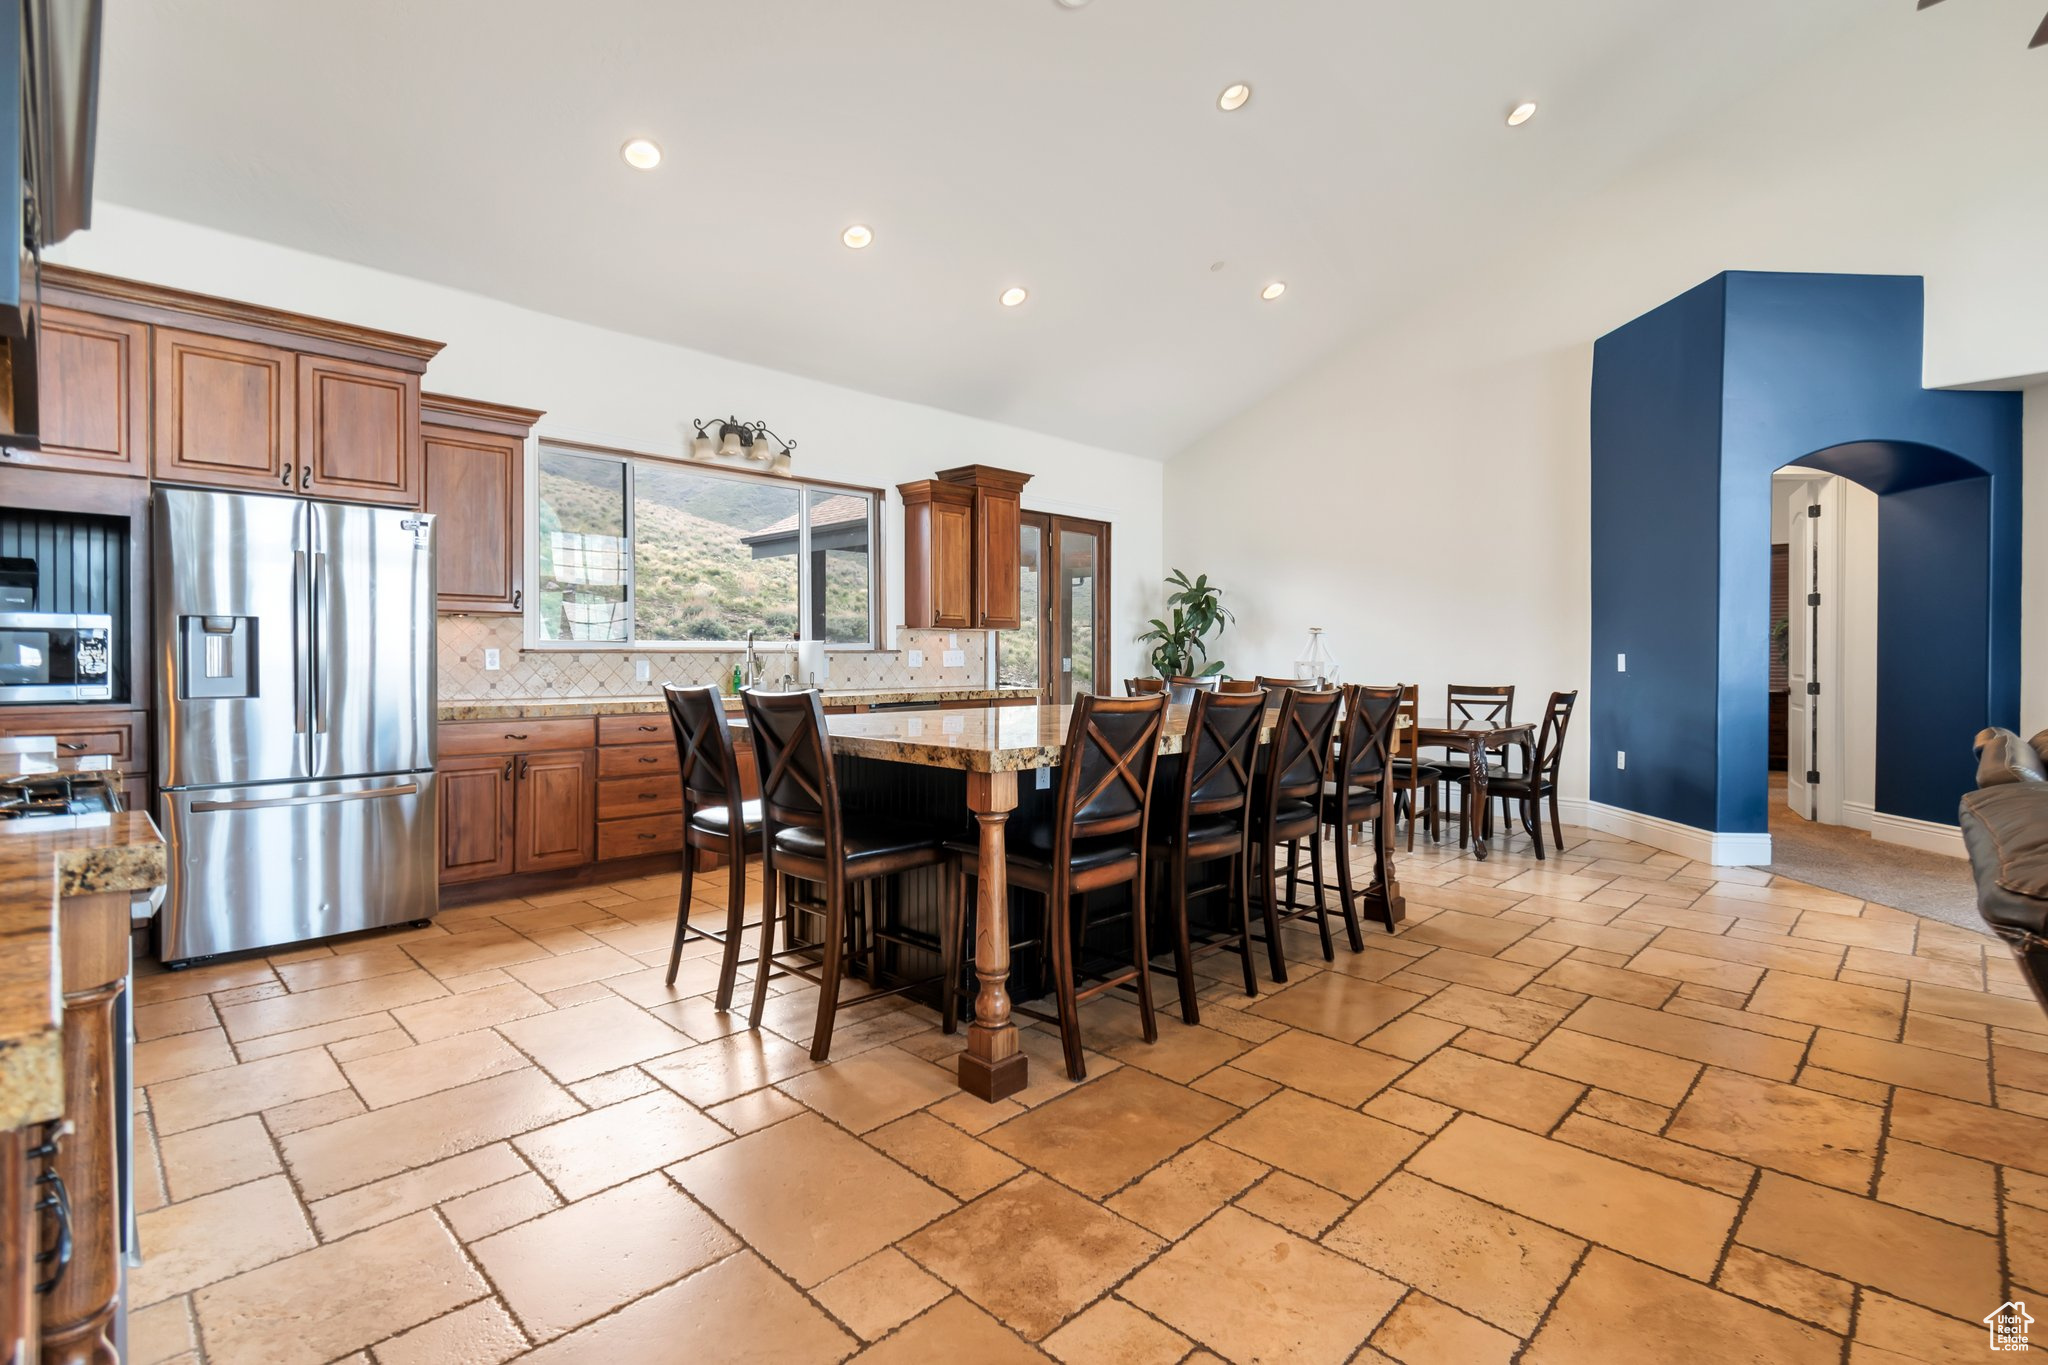 Dining space with high vaulted ceiling and light tile flooring